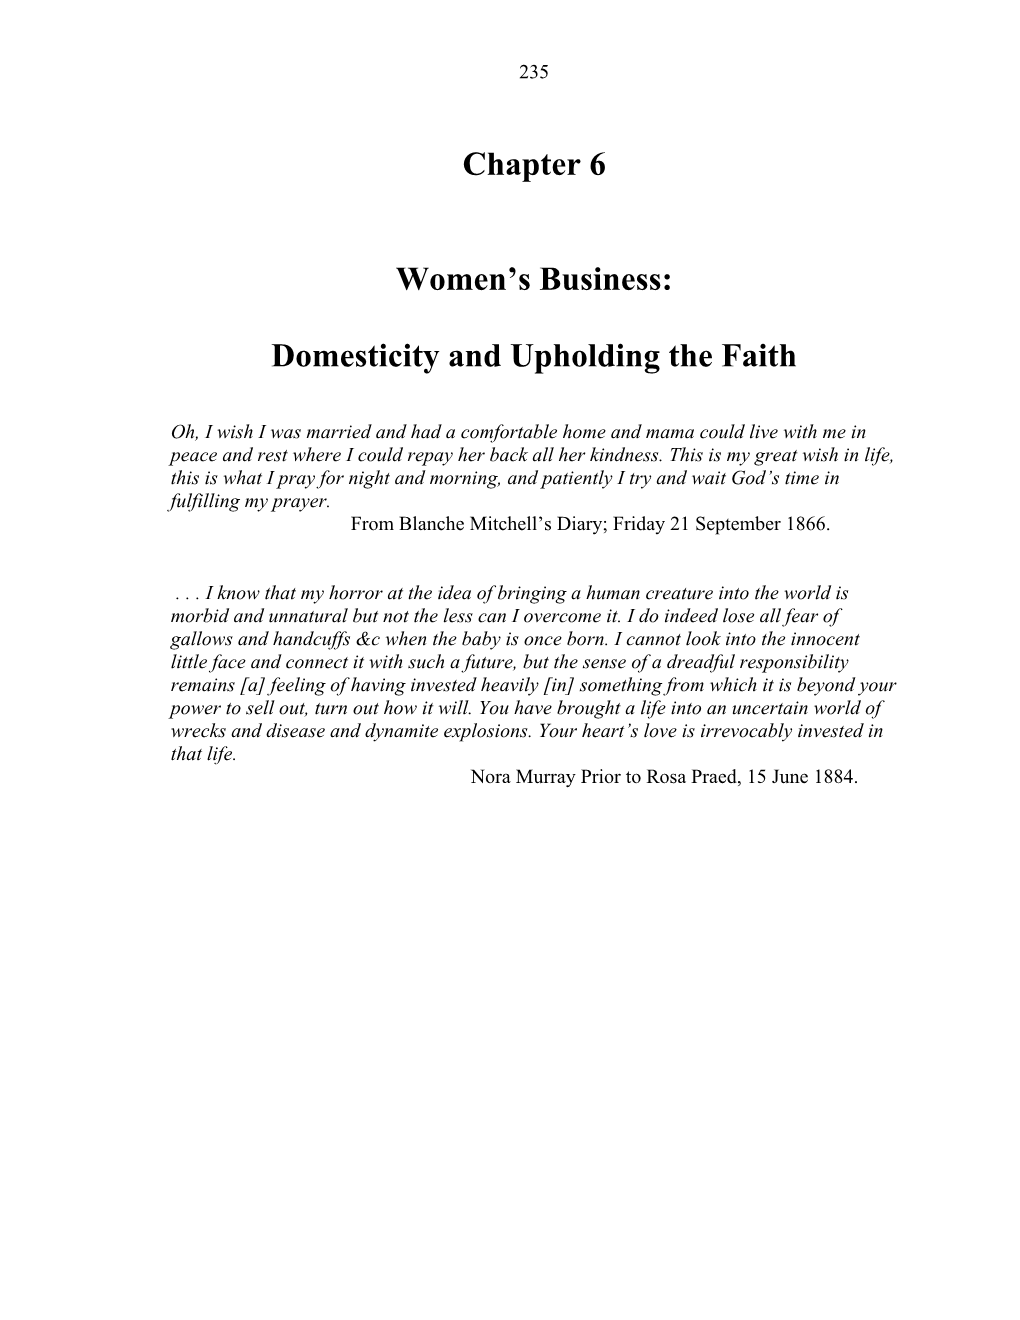 Domesticity and Upholding the Faith